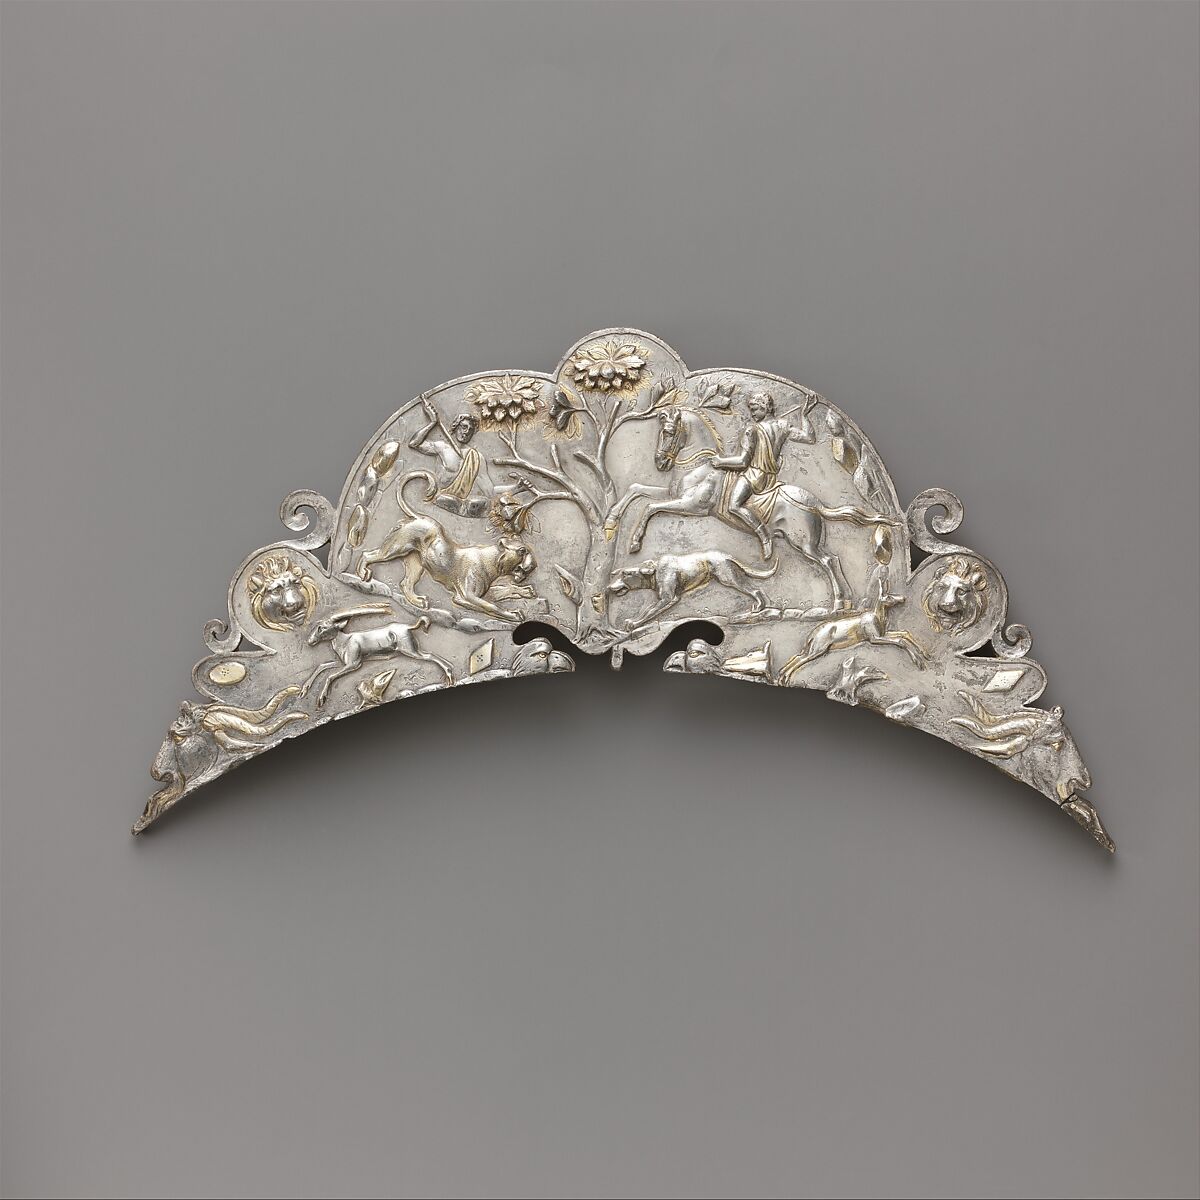 Silver handle of a large dish, Silver, gold, Roman 